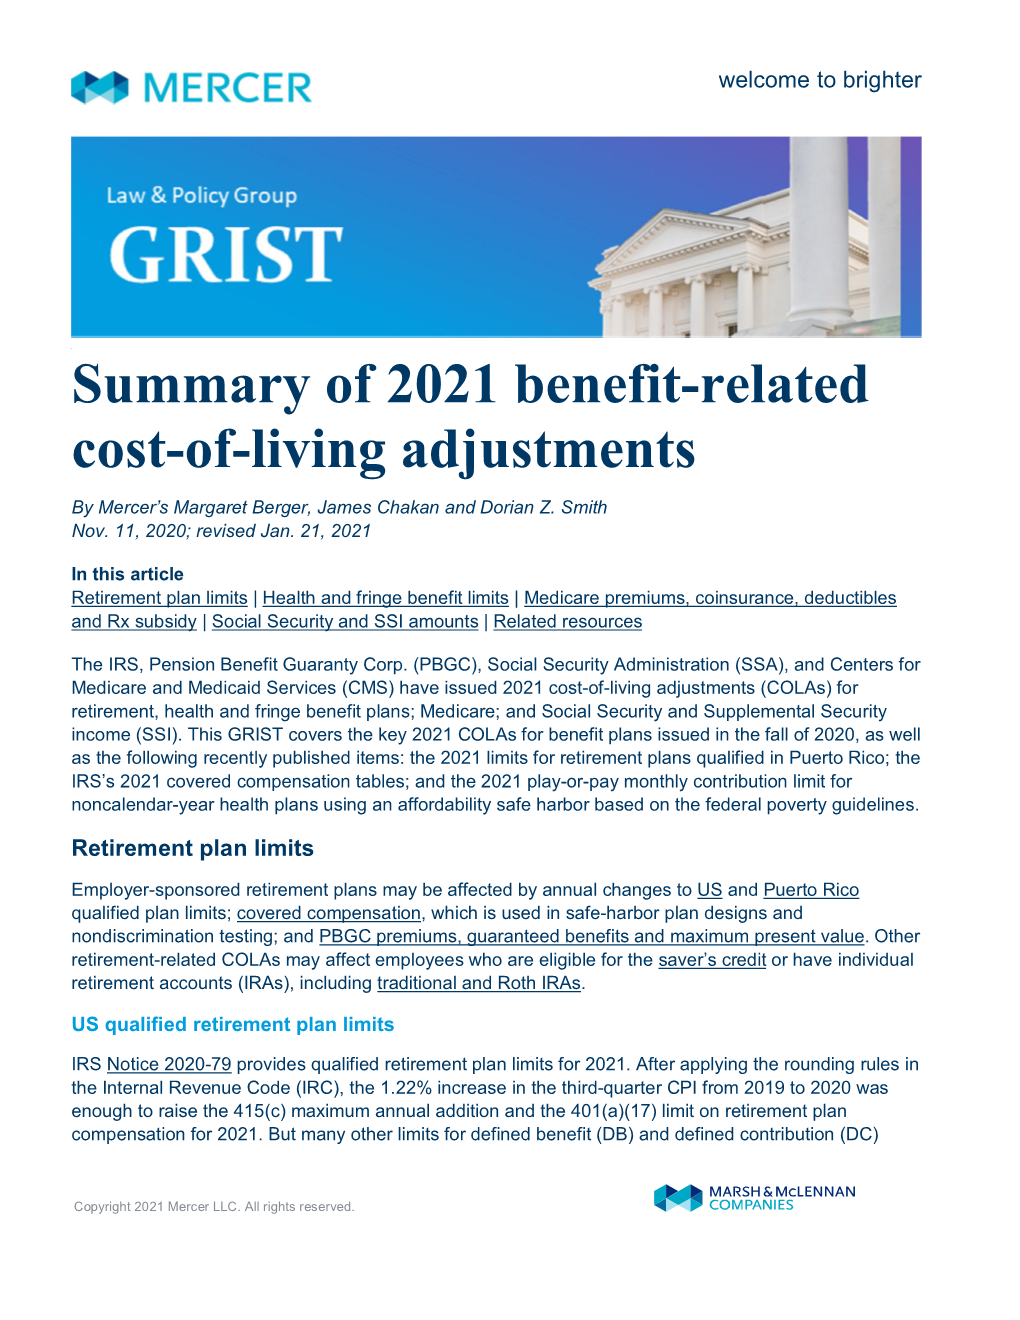 Summary of 2021 Benefit-Related Cost-Of-Living Adjustments